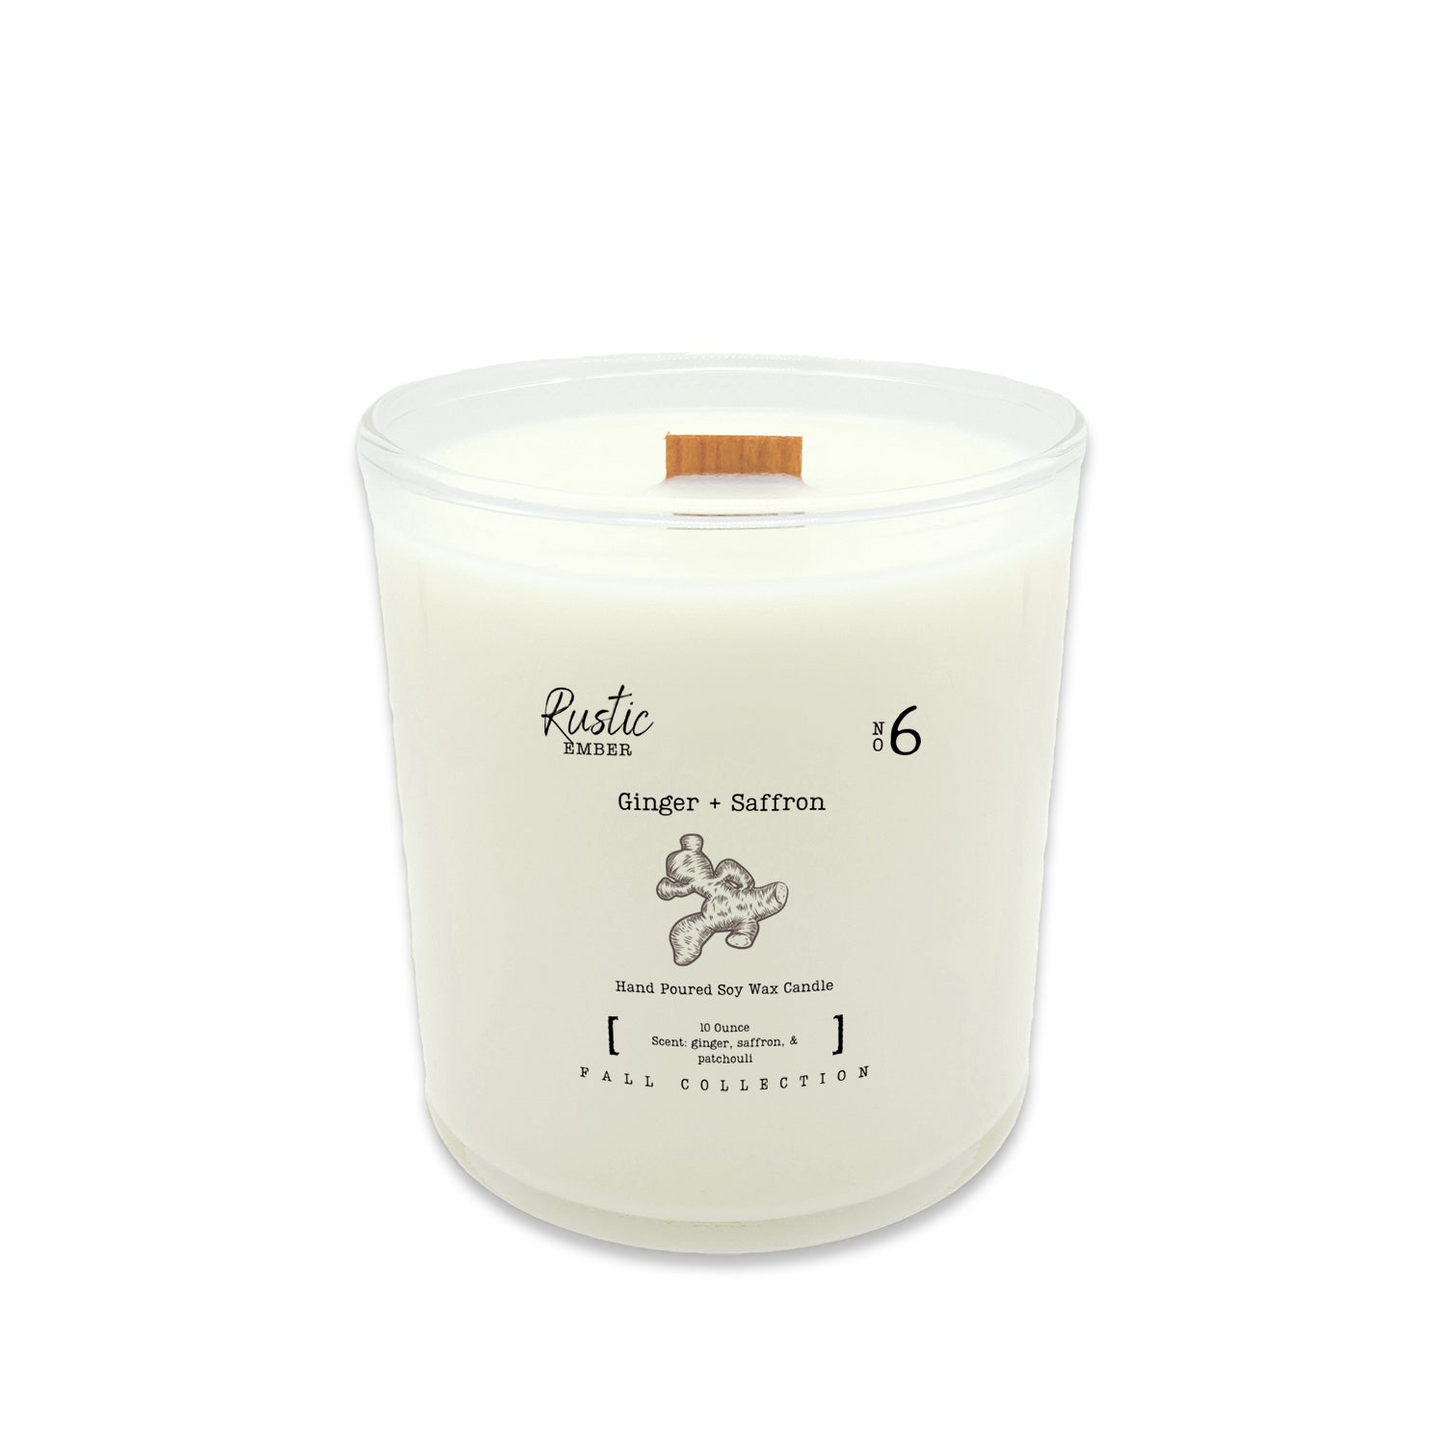 Ginger + Saffron | 10 Ounce Candle | Rustic Ember